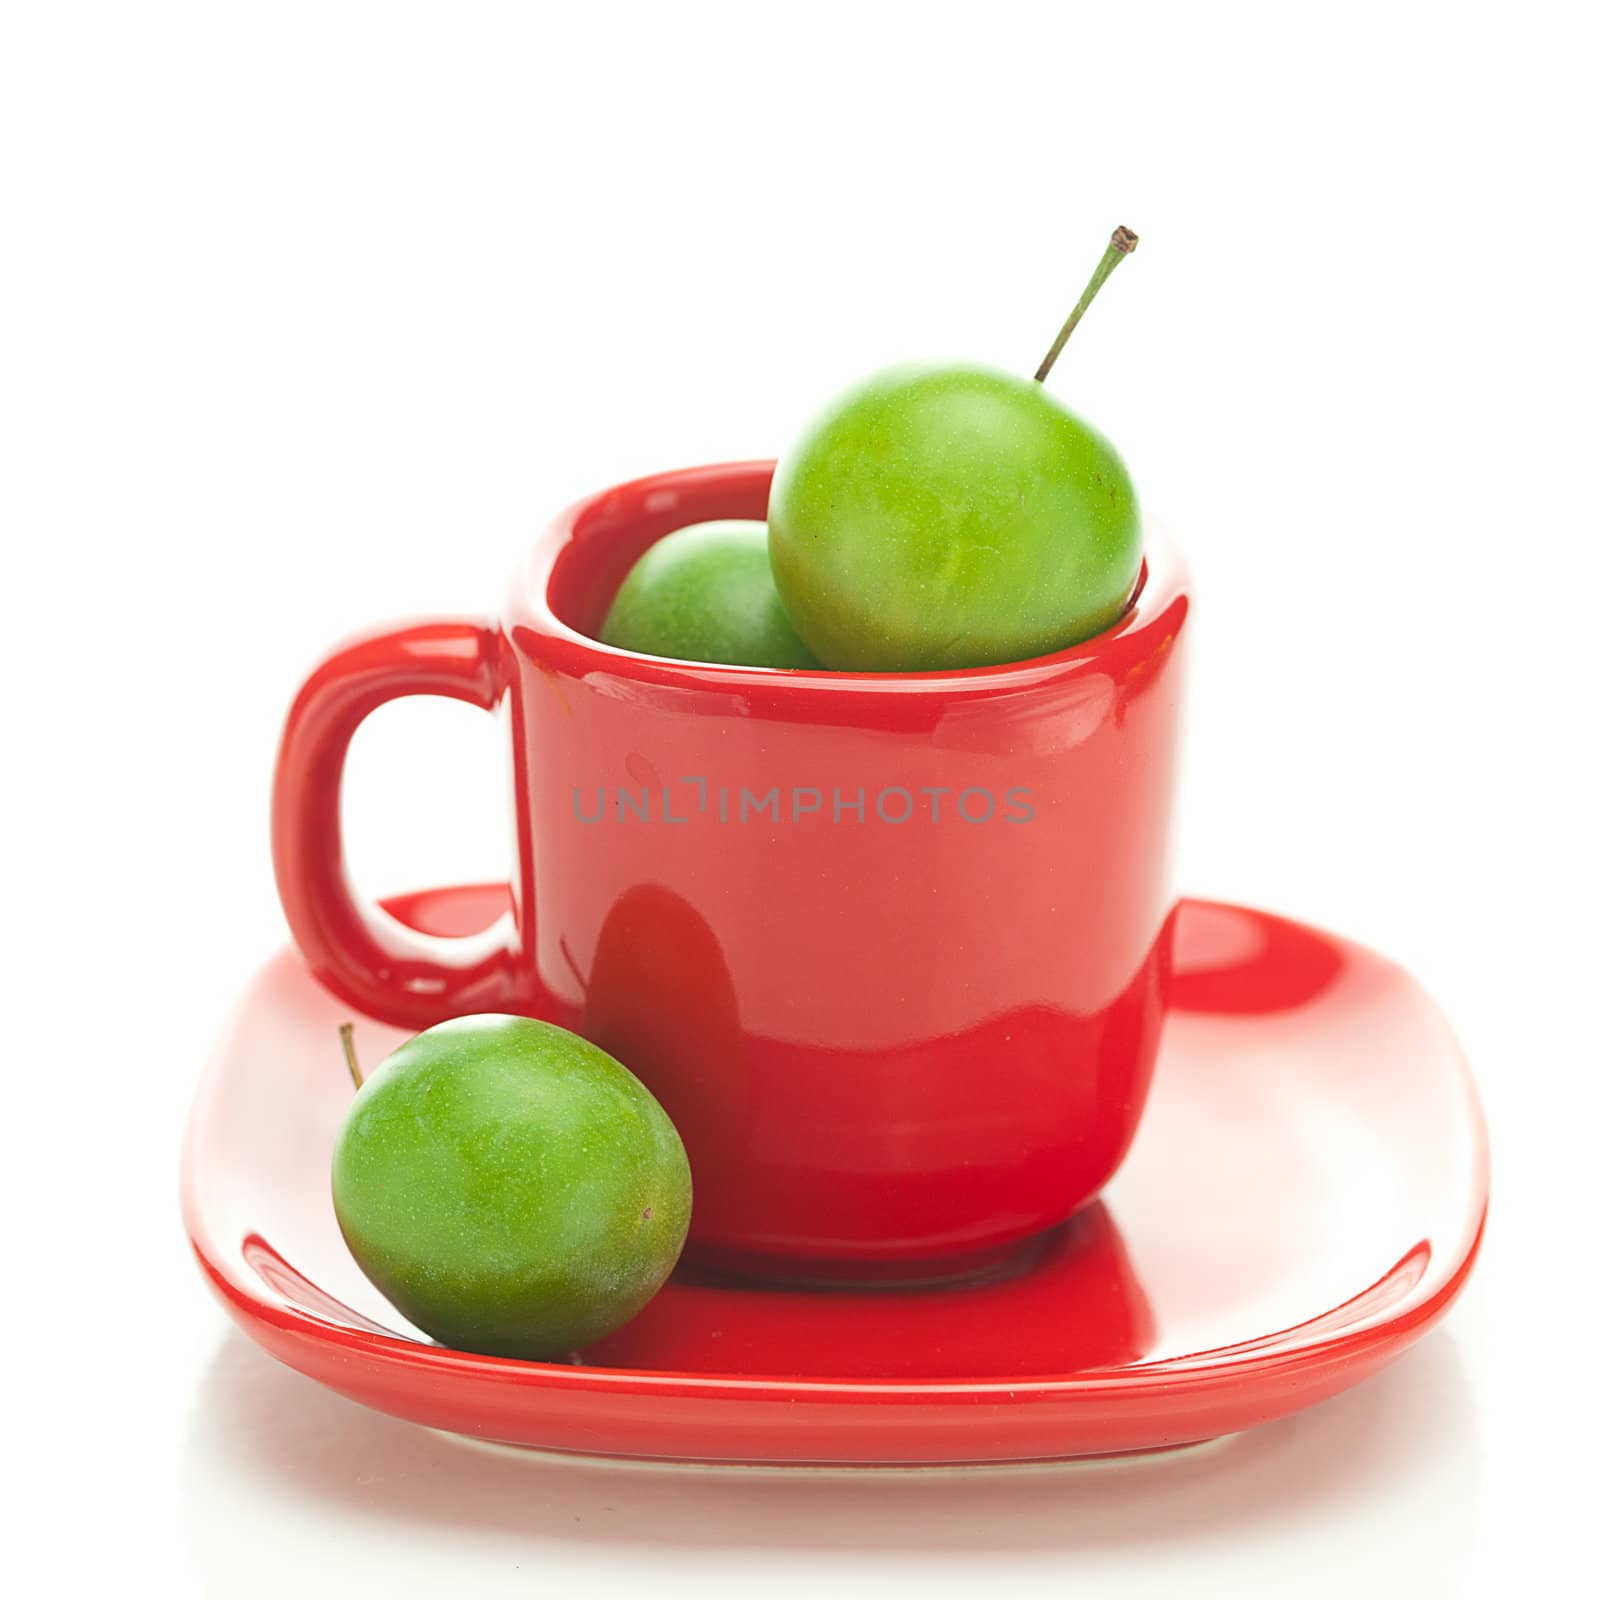 green plum  in the red cup isolated on white by jannyjus